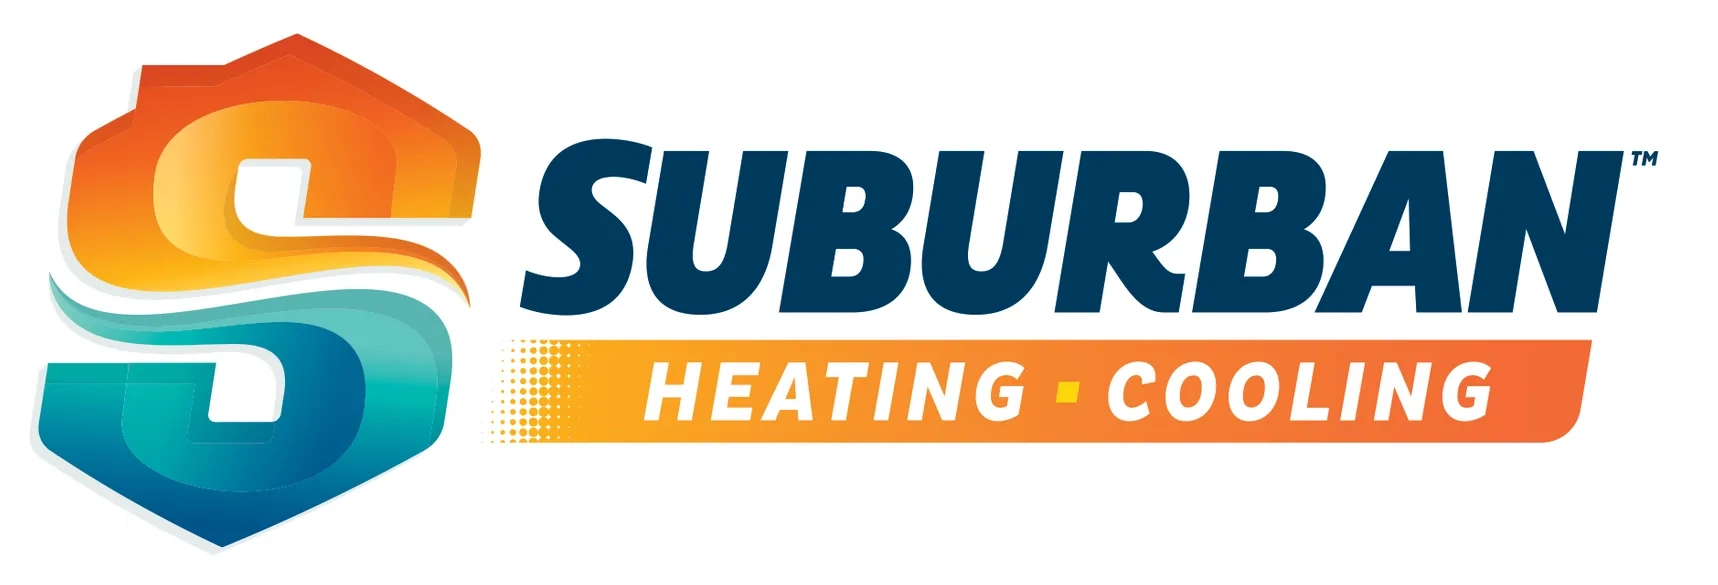 Suburban Heating and Cooling Logo